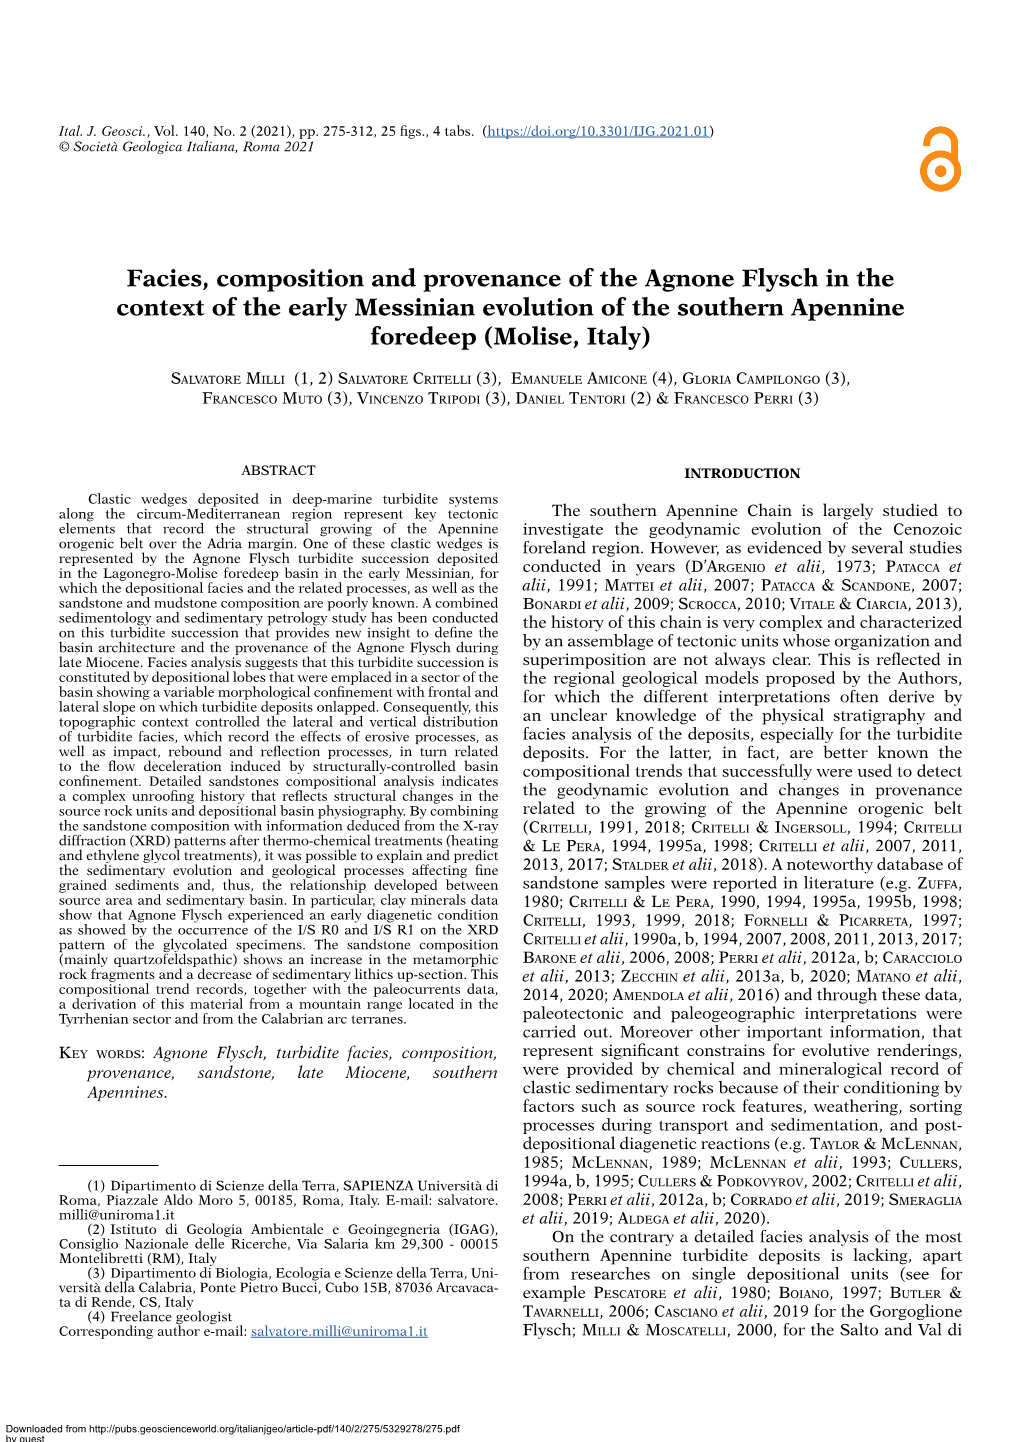 Facies, Composition and Provenance of the Agnone Flysch in the Context of the Early Messinian Evolution of the Southern Apennine Foredeep (Molise, Italy)